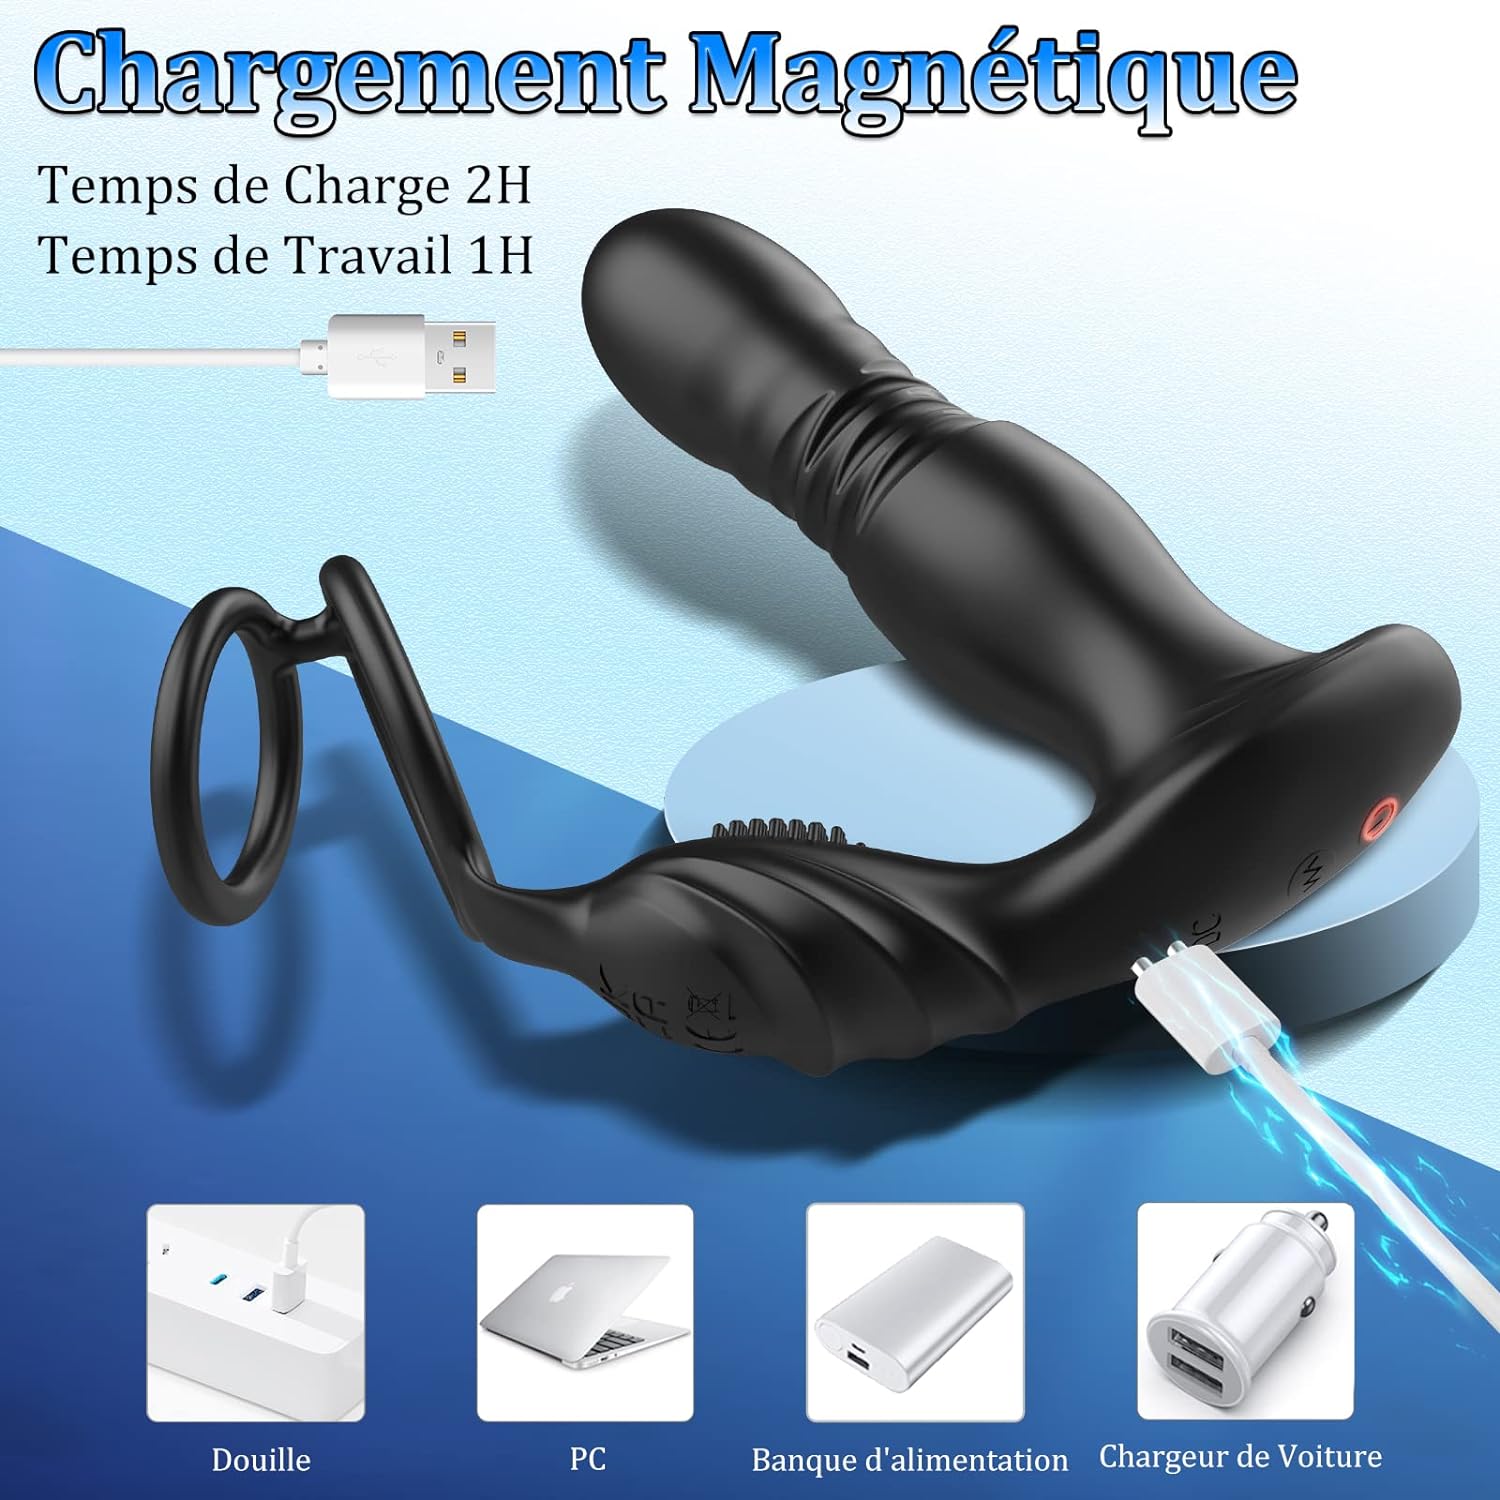 3 In 1 Vibrating Prostate Massager with Penis Ring, Remote G-spot Vibrating Anal Plug Vibrator with 10 vibrating thrust modes Waterproof For Men Women Couple